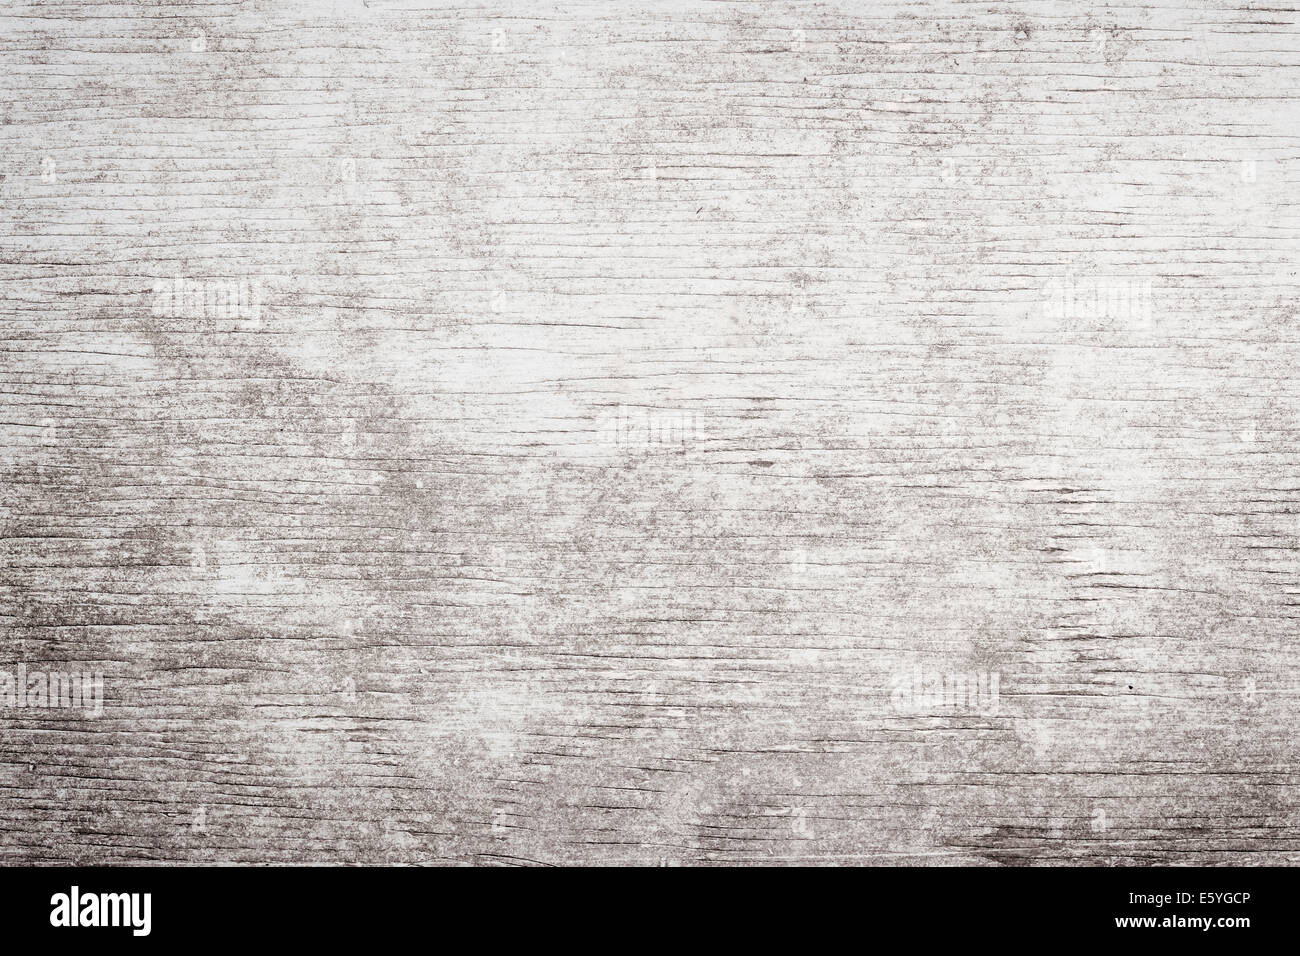 Gray wooden background of weathered distressed rustic wood with faded white paint showing woodgrain texture Stock Photo